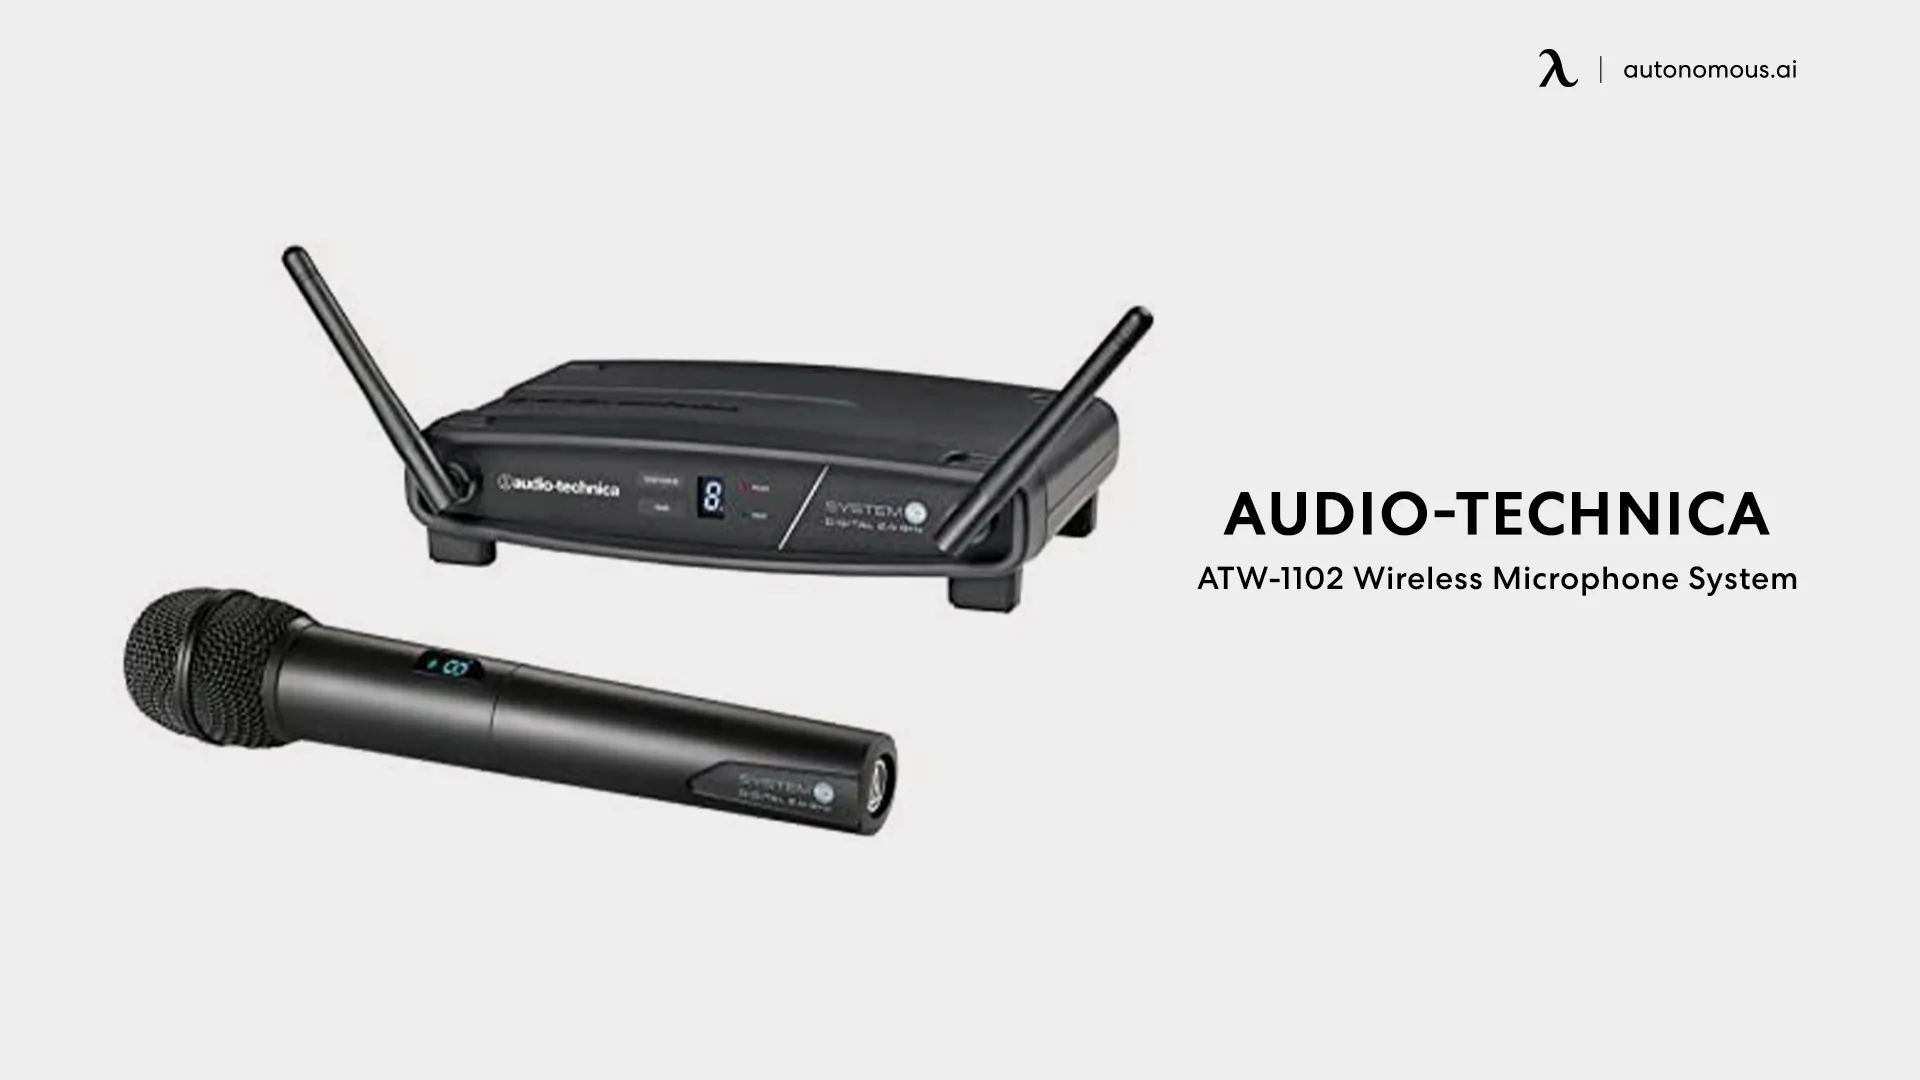 ATW-1102 Wireless Microphone System by Audio-Technica